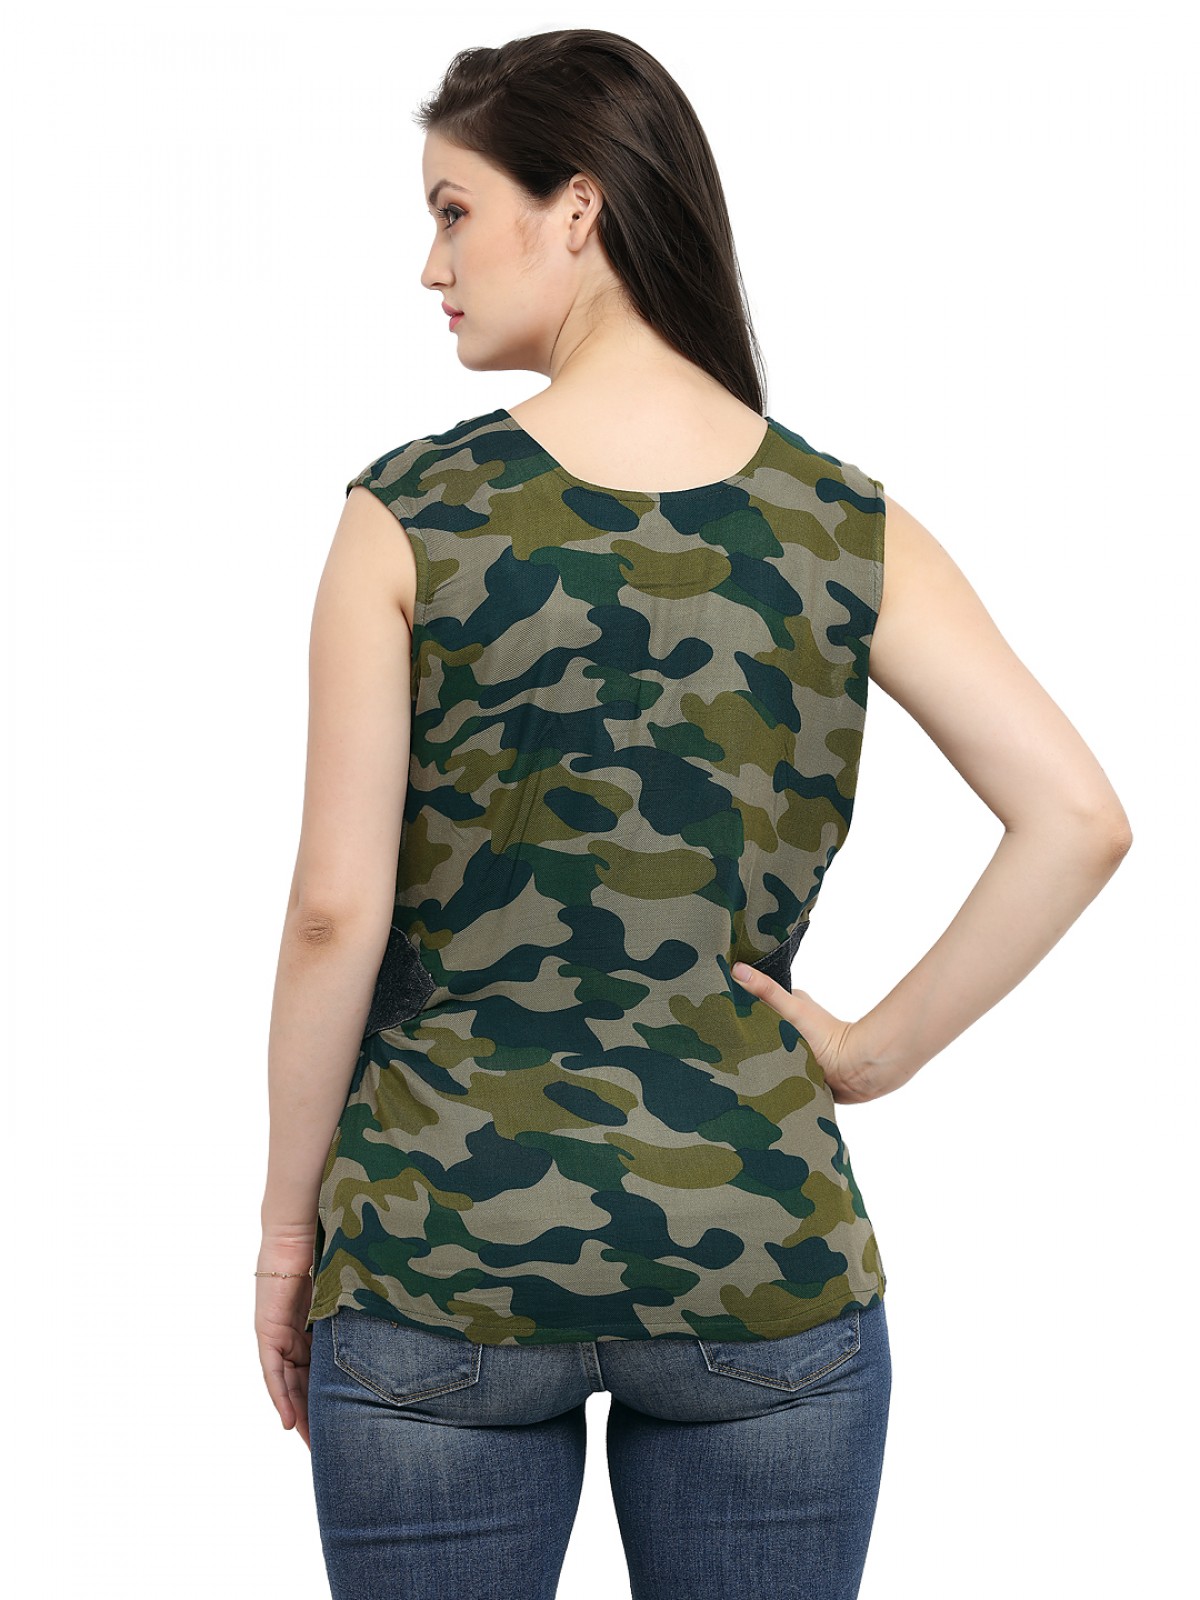 Camouflage Sleeveless Military Printed Boat Neck Top